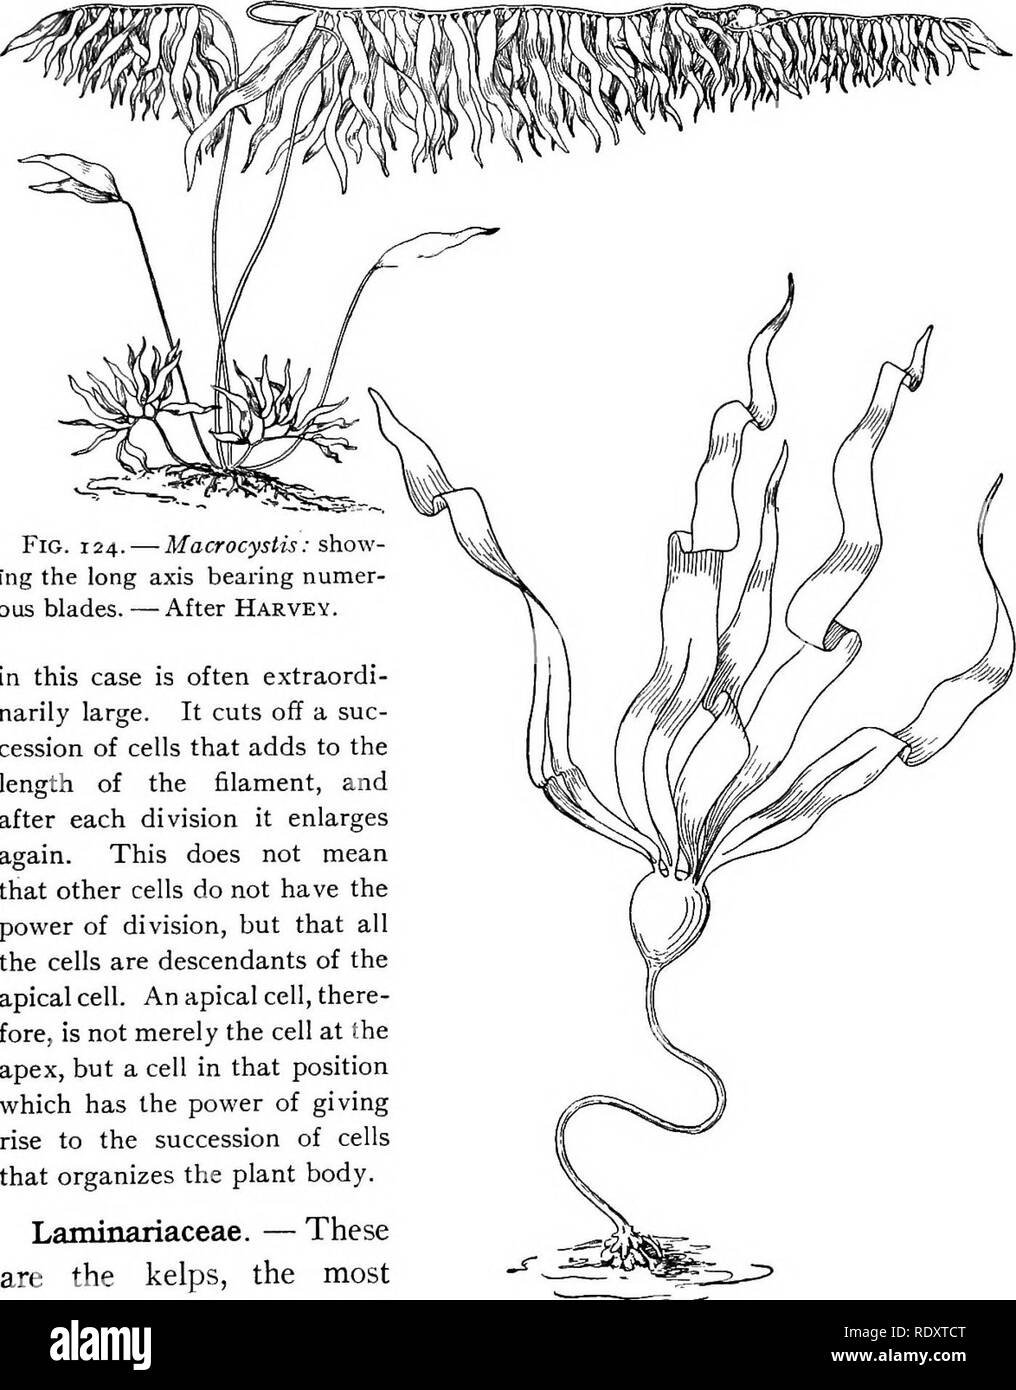 . A textbook of botany for colleges and universities ... Botany. THALLOPHYTES 47 cell. In such filamentous bodies as were met among the green algae, the filament is elongated by the division of all the cells ; in other words, the power of cell-divi- sion is distributed throughout the filament. In Ectocarpus this power of cell- division to elongate the filament is more restricted, often being specially present in a region behind the tip, where the divisions occur in unusually rapid succession. In Sphacdaria this special power has become restricted to the apical cell, which. Fig. 124. â Macrocys Stock Photo